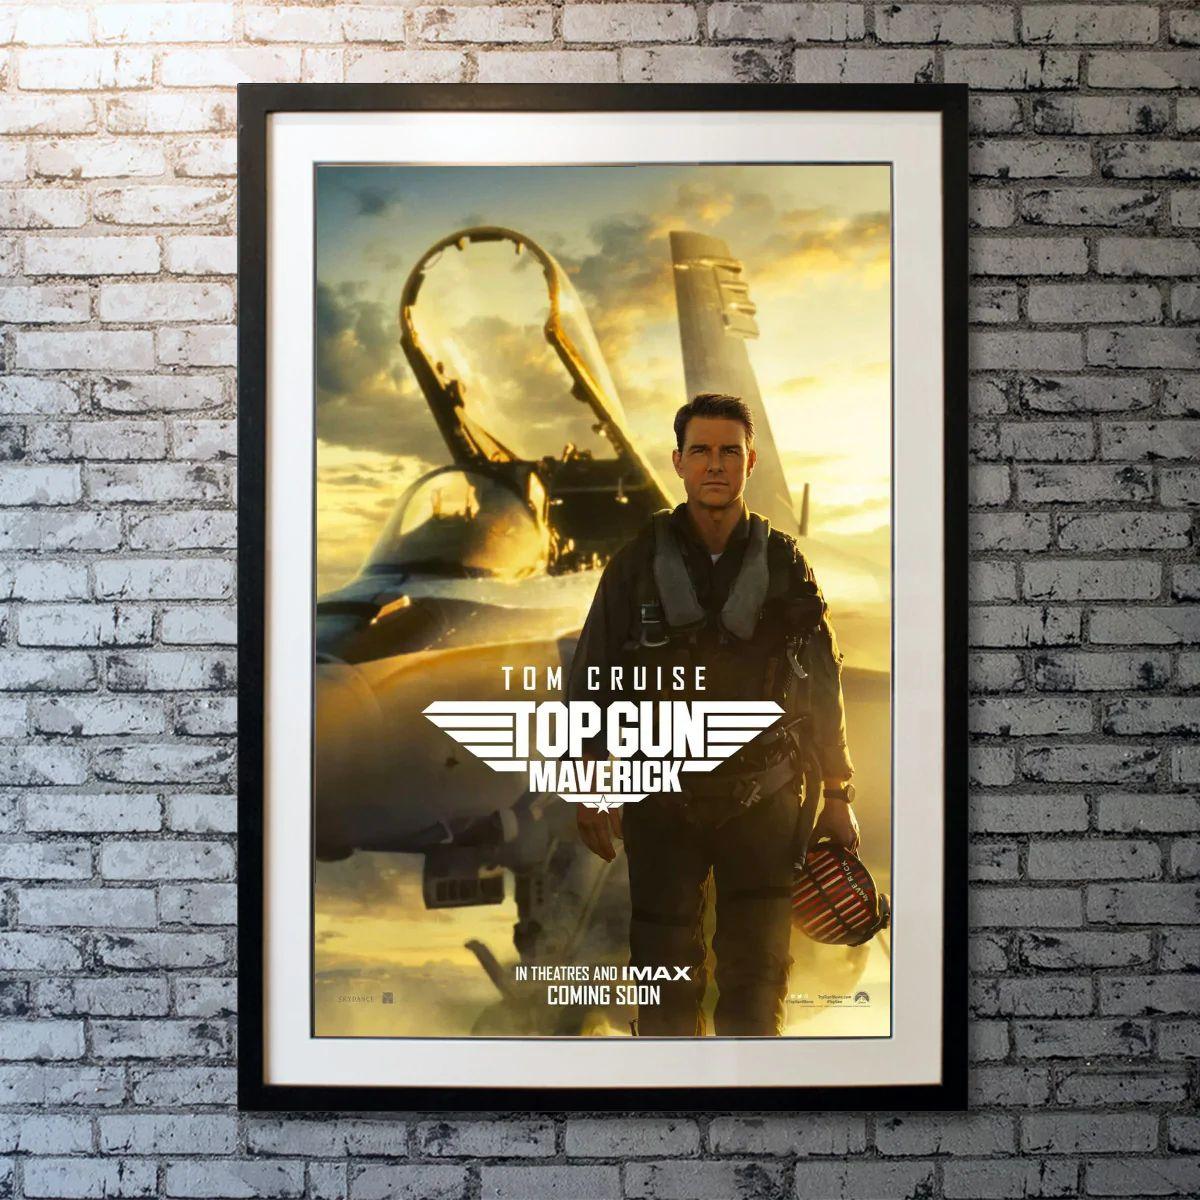 Top Gun: Maverick, Unframed Poster, 2022

After more than thirty years of service as one of the Navy's top aviators, Pete Mitchell is where he belongs, pushing the envelope as a courageous test pilot and dodging the advancement in rank that would